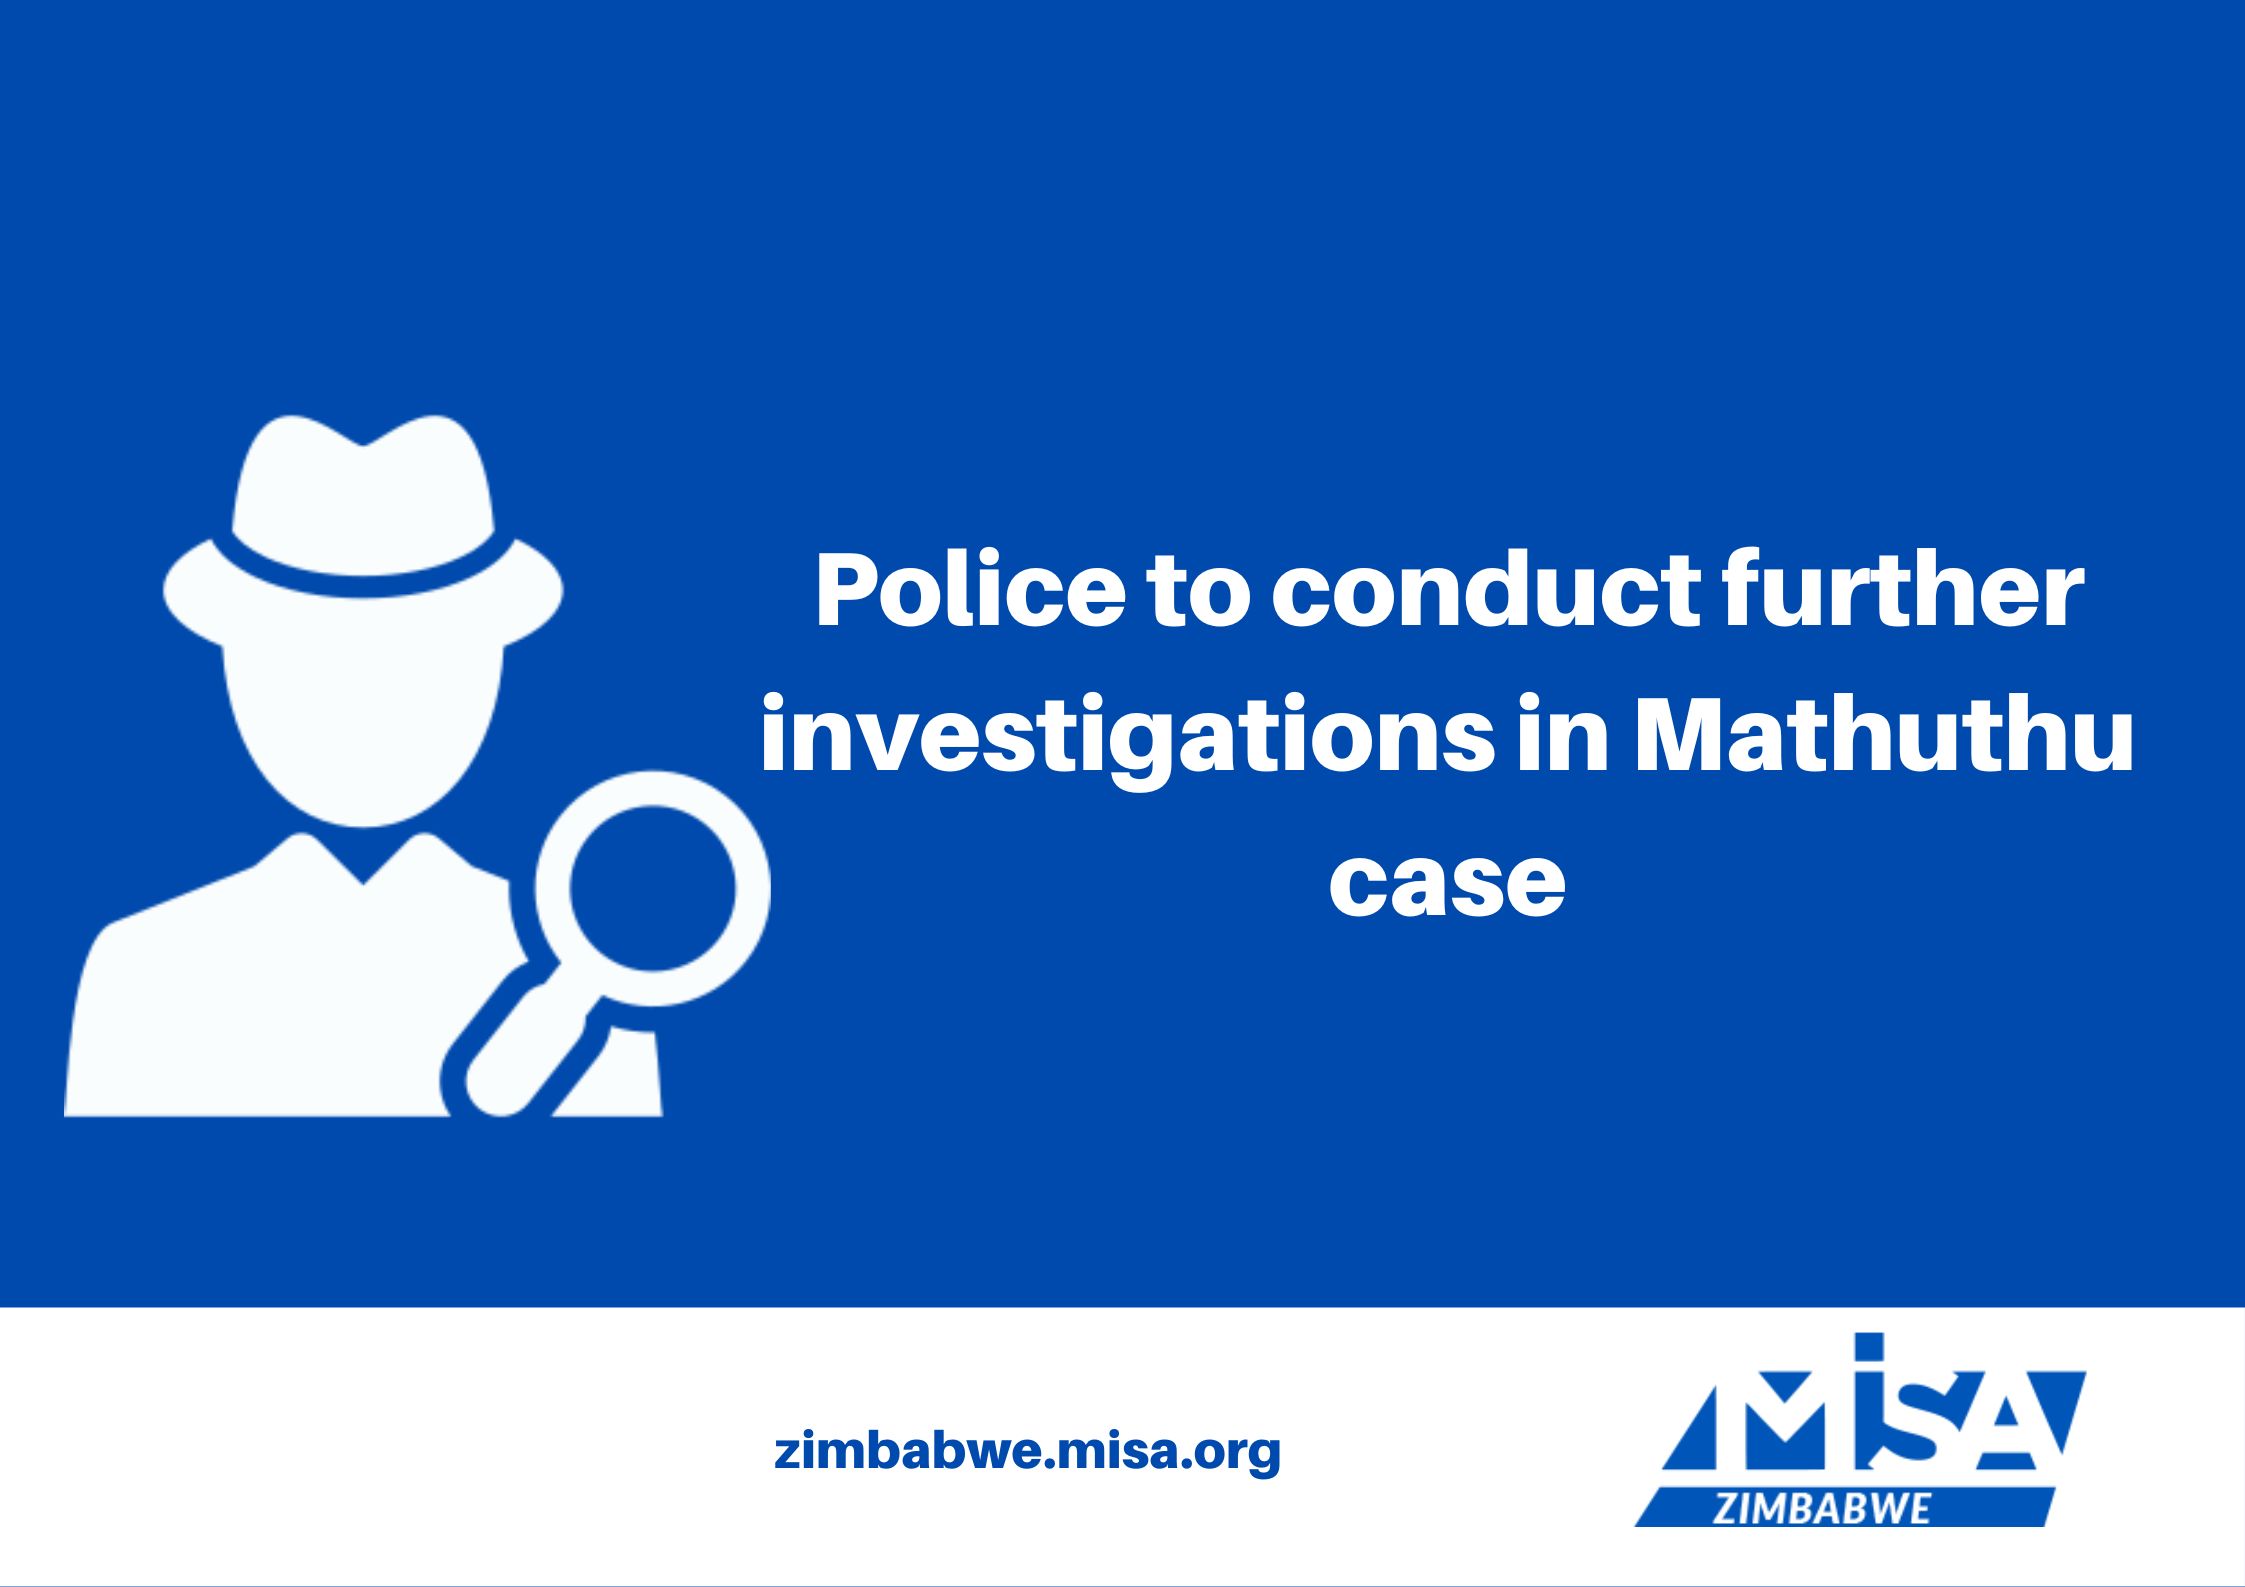 Police to conduct further investigations in Mathuthu case